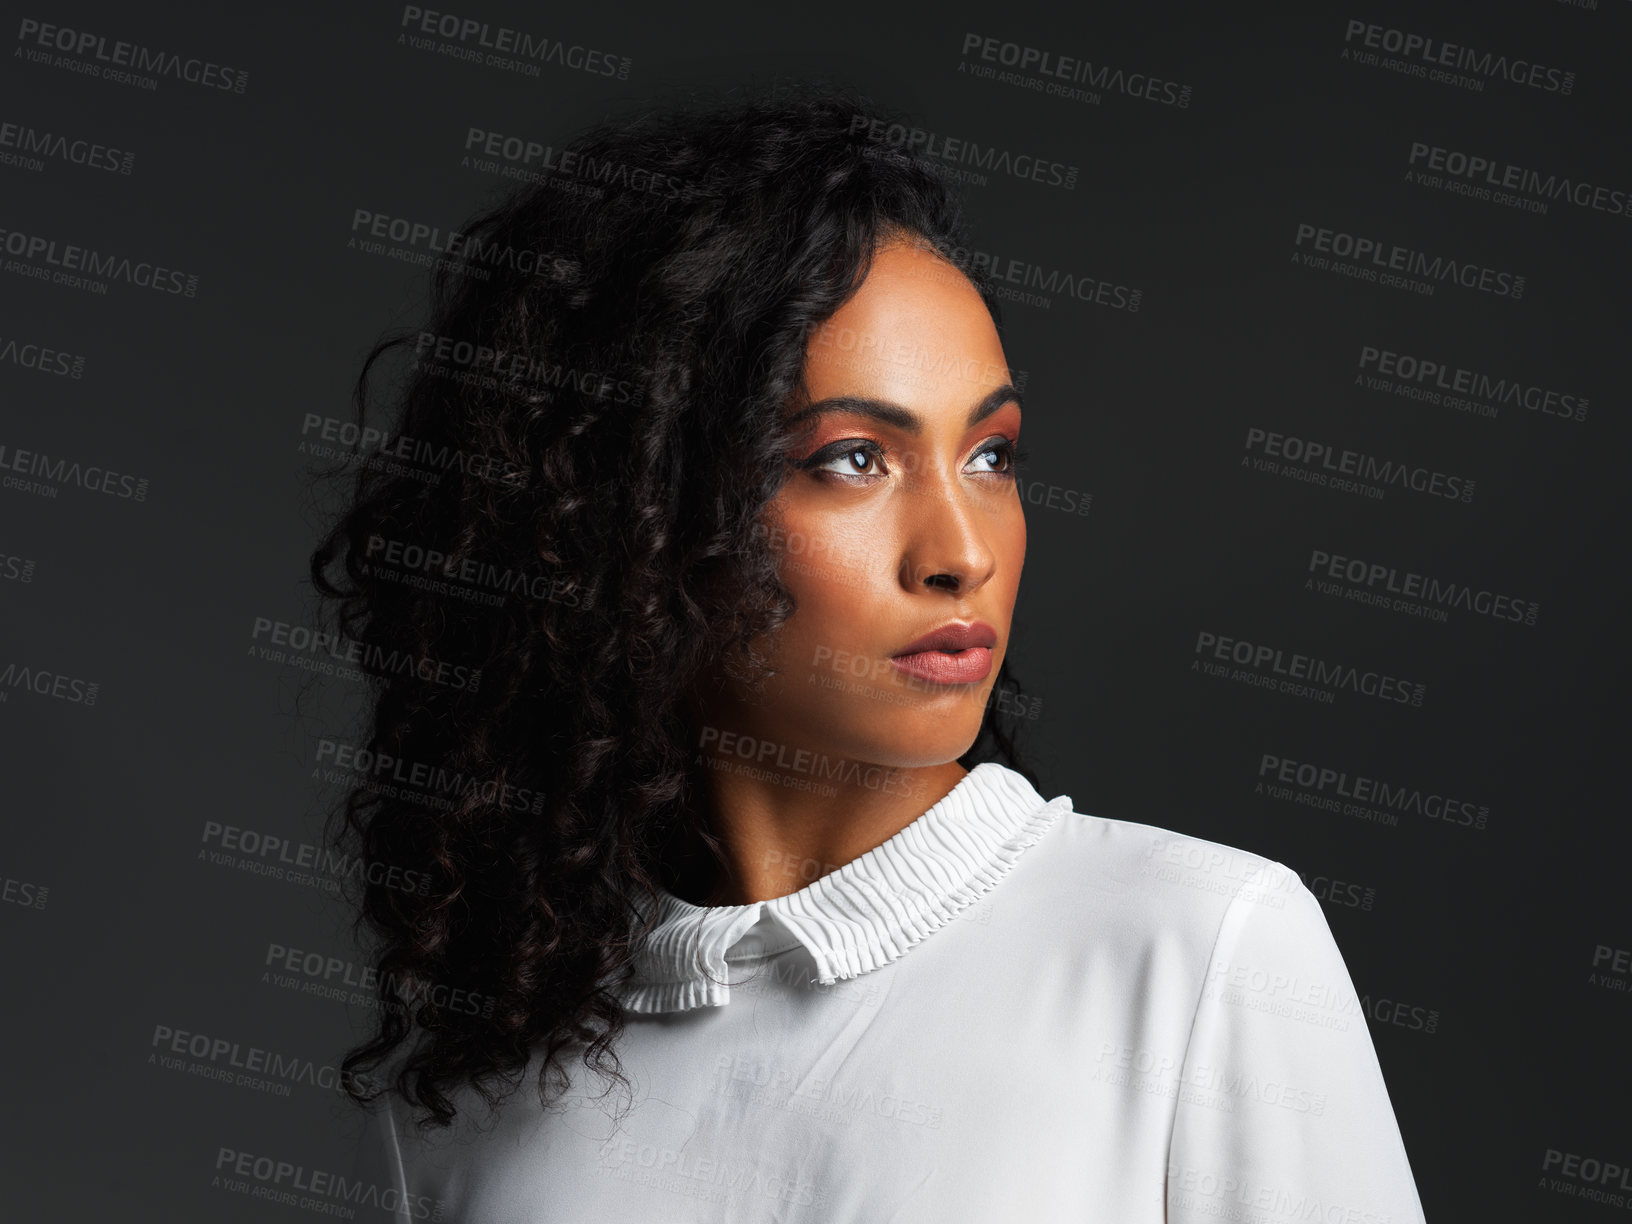 Buy stock photo Studio shot of an attractive young woman wearing a white blouse and posing alone against a dark background